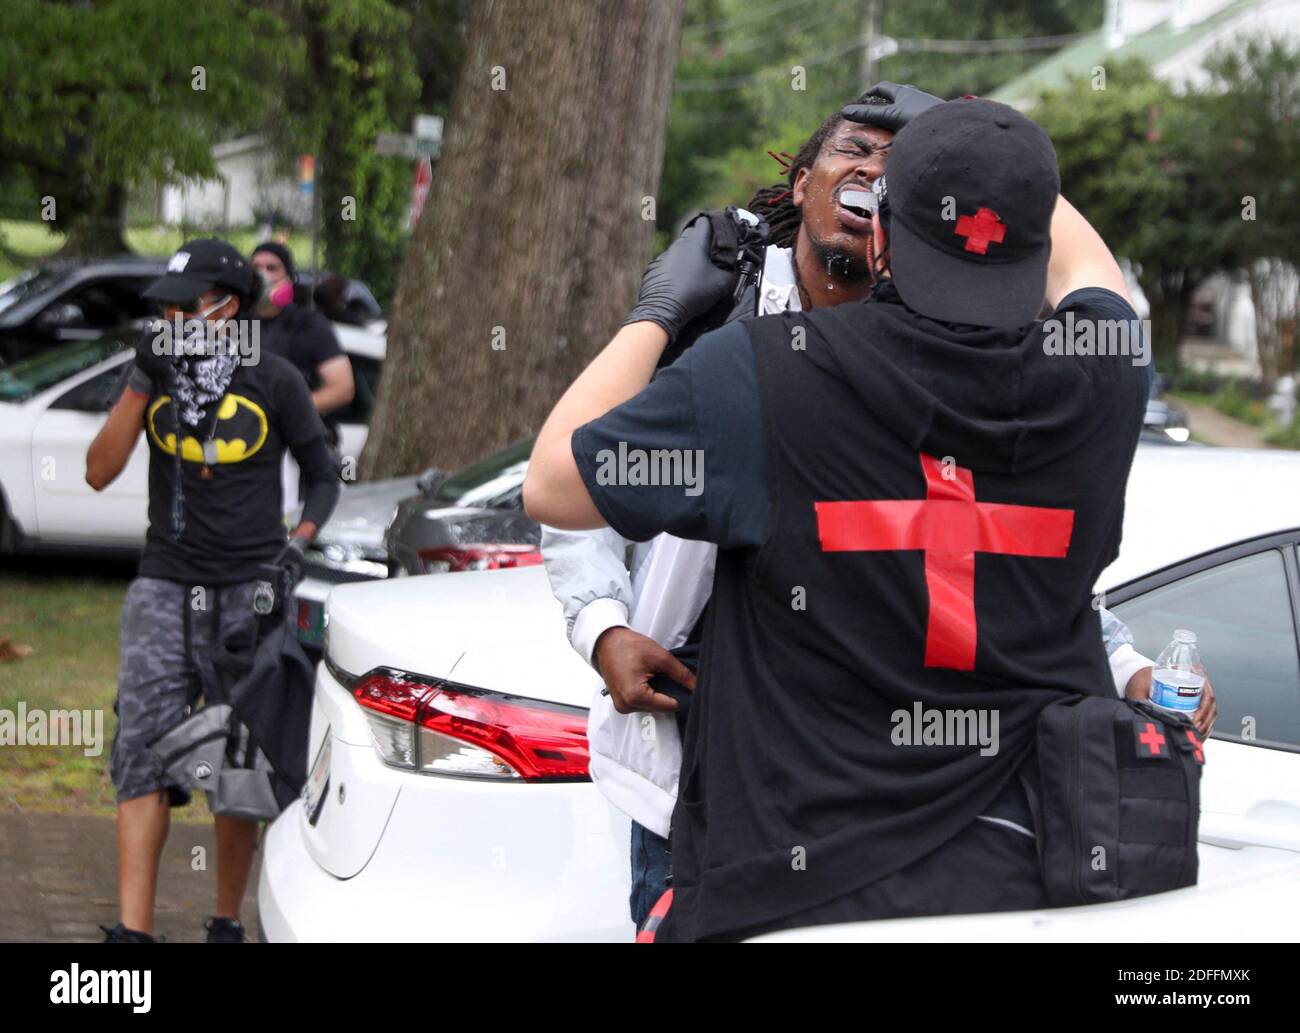 NO FILM, NO VIDEO, NO TV, NO DOCUMENTARY - A counter protestor gets his eyes washed out after a protestor sprayed him with bug spray as several far-right groups, including militias and white supremacists, rally on Saturday, Aug. 15, 2020. Photo by Alyssa Pointer/Atlanta Journal-Constitution/TNS/ABACAPRESS.COM Stock Photo